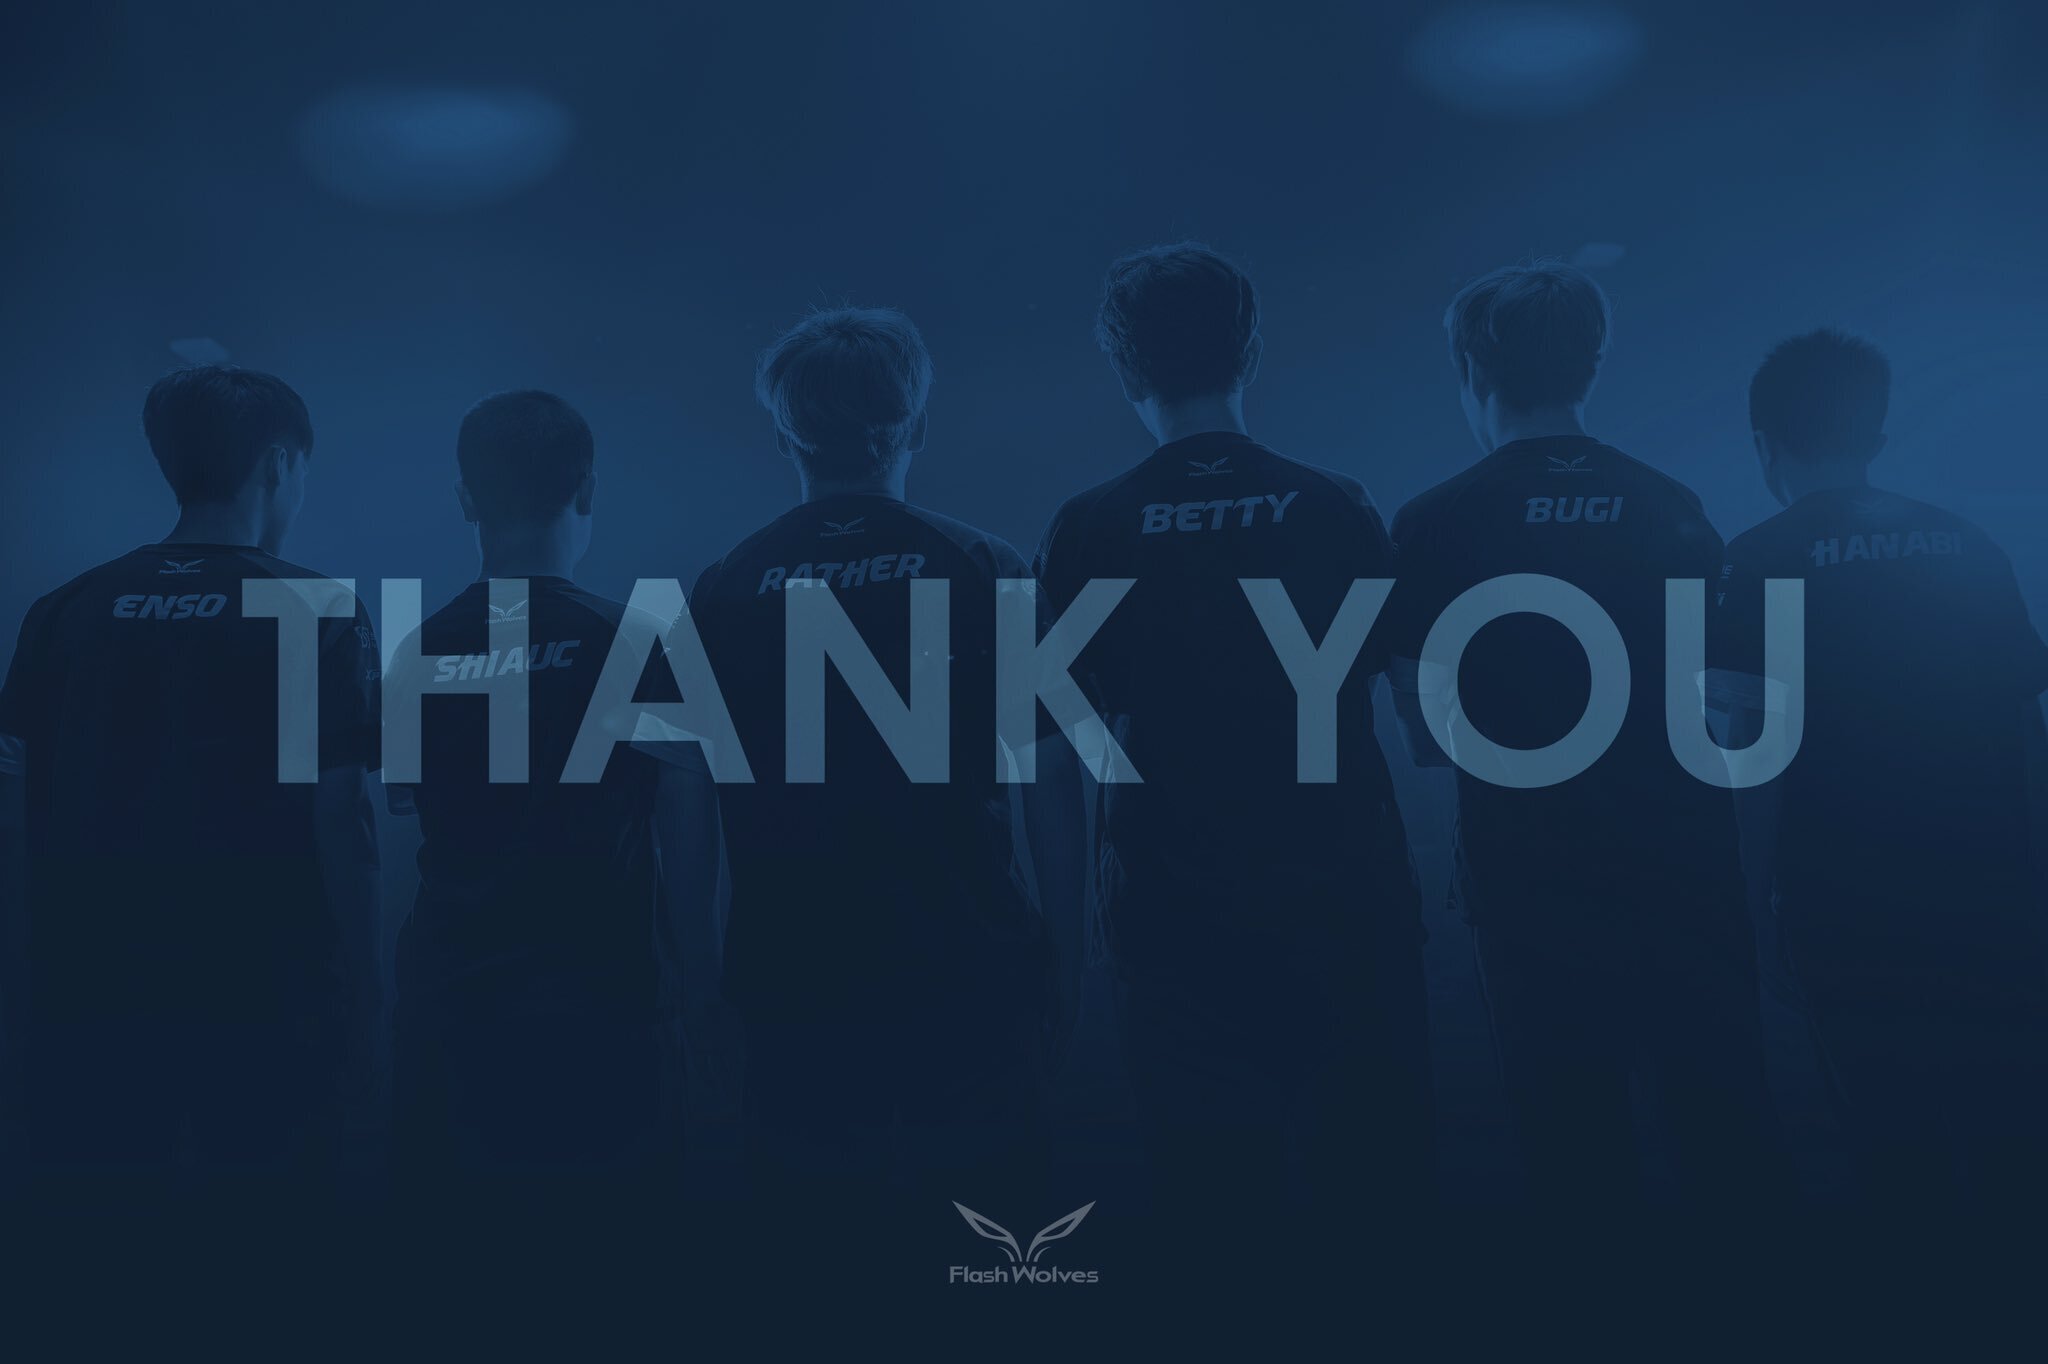 The Flash Wolves were an iconic organization that will be remembered as one of the most important teams in League’s history (Image via Flash Wolves)